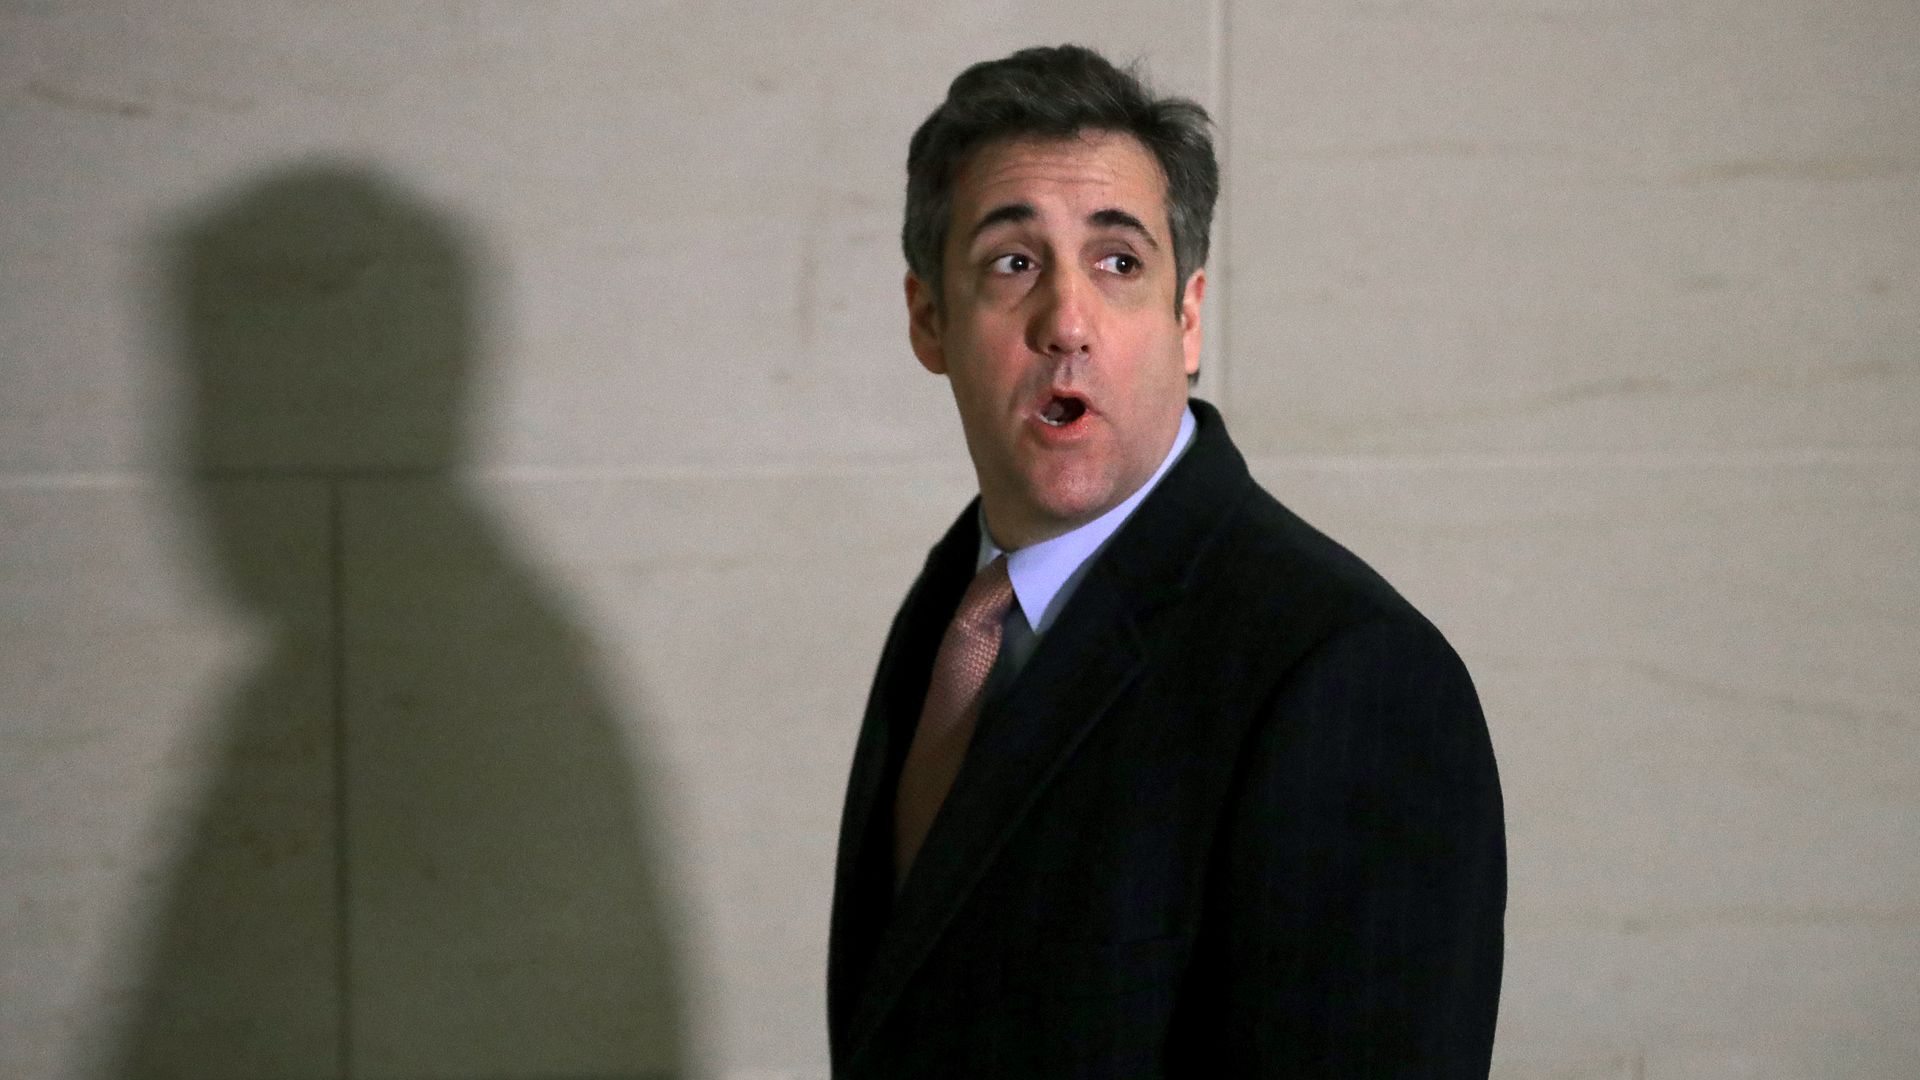 In this image, Michael Cohen looks behind him while looking surprised. 